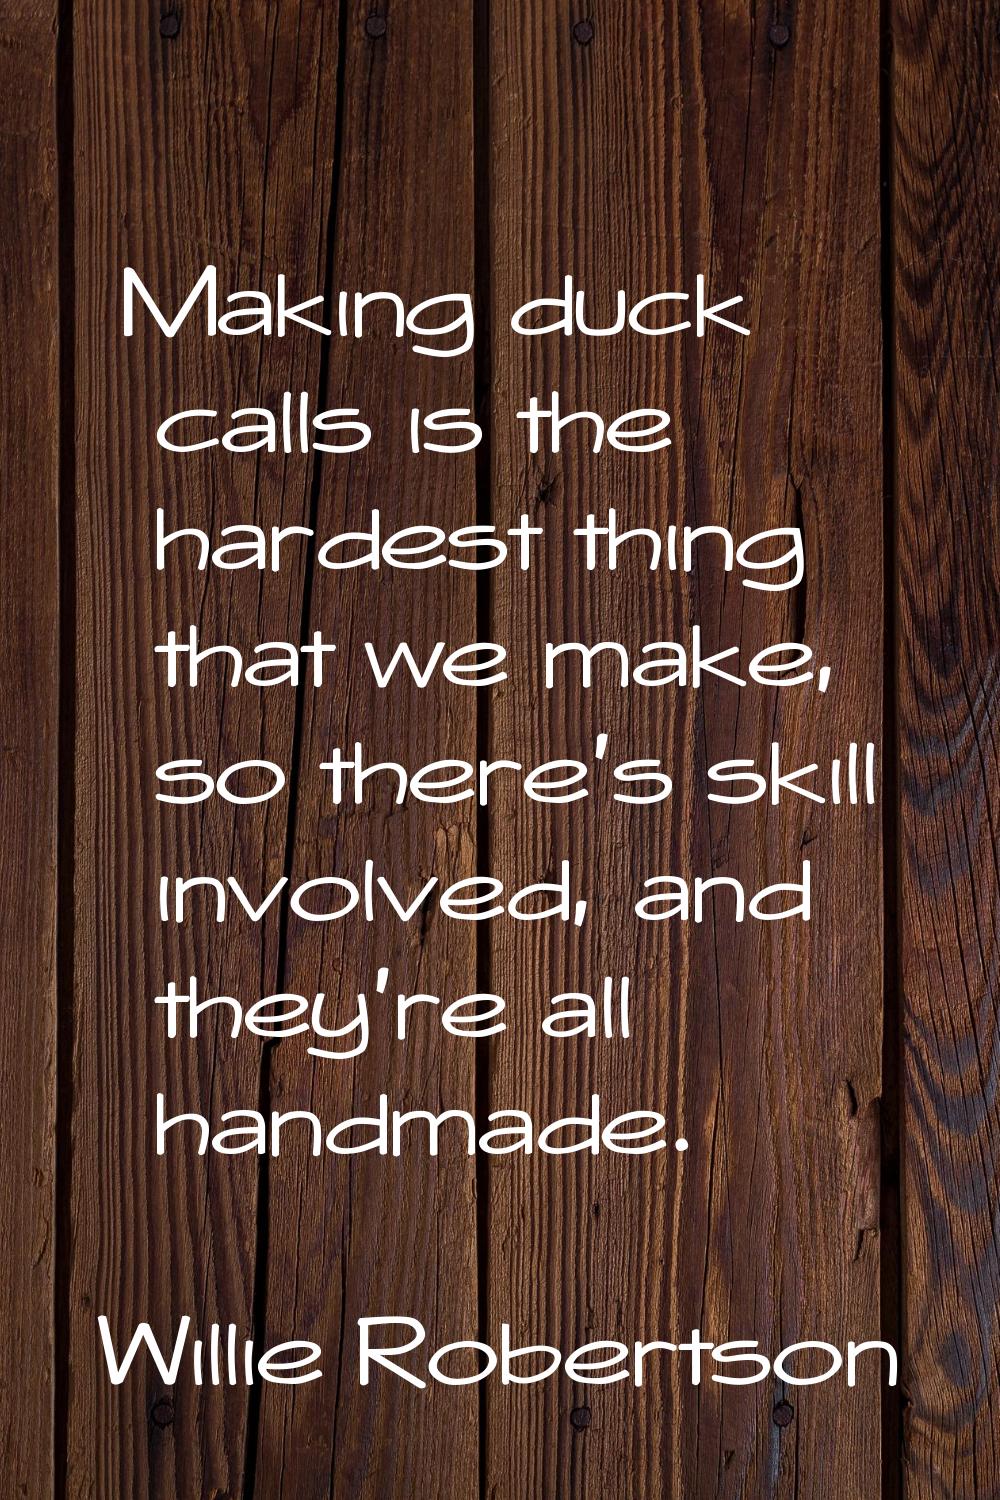 Making duck calls is the hardest thing that we make, so there's skill involved, and they're all han